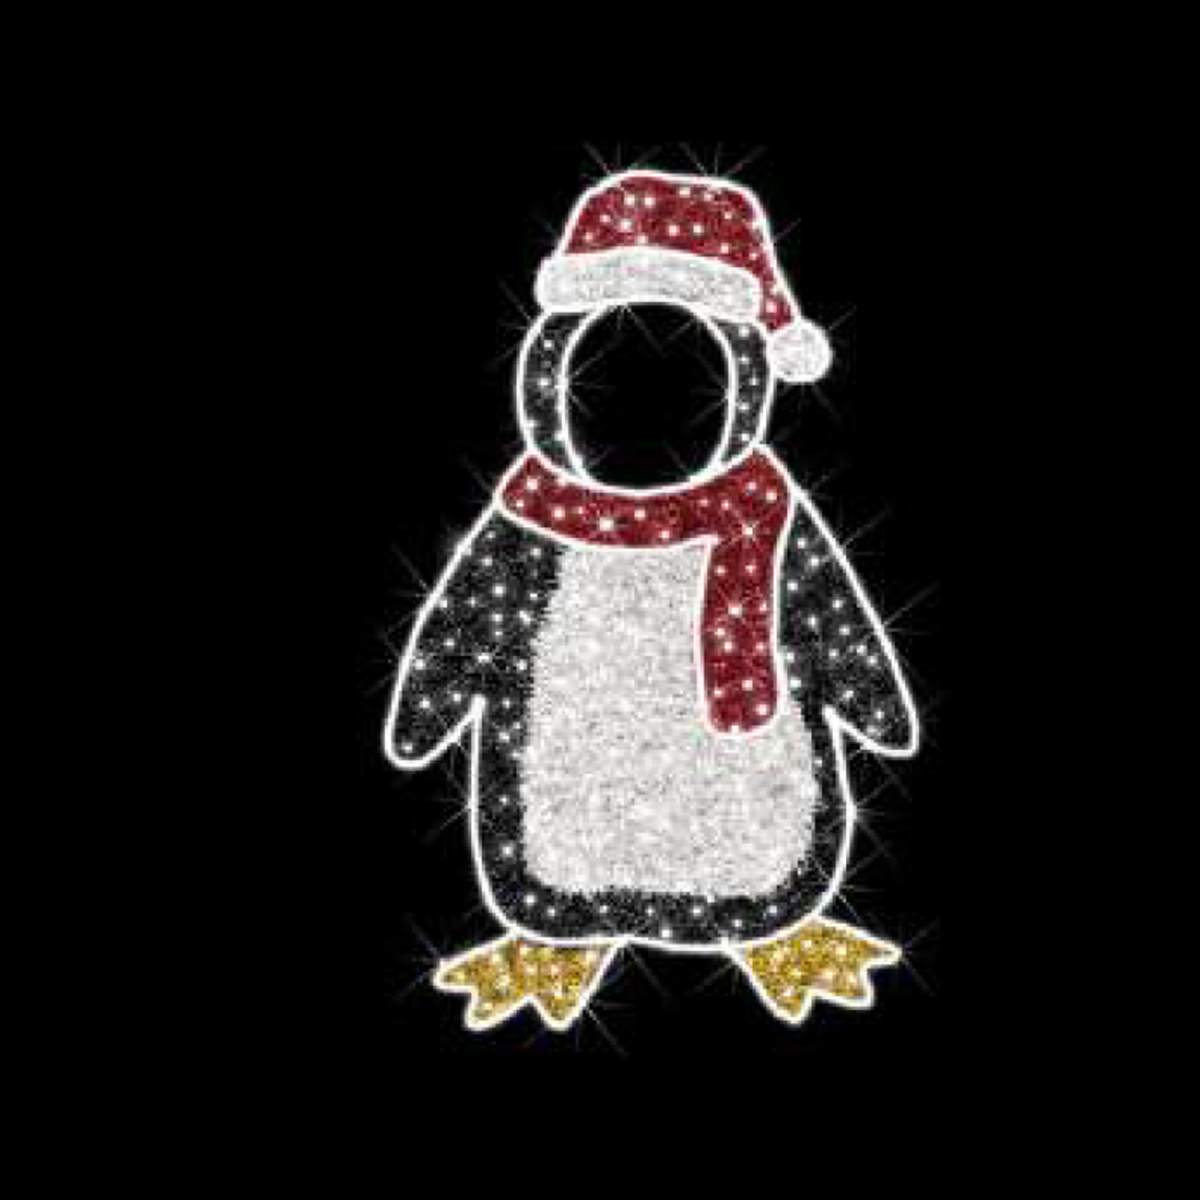 2D Festive Penguin Photo Op - Large Commercial Illuminated Display - LED Lights - 4.3ft tall